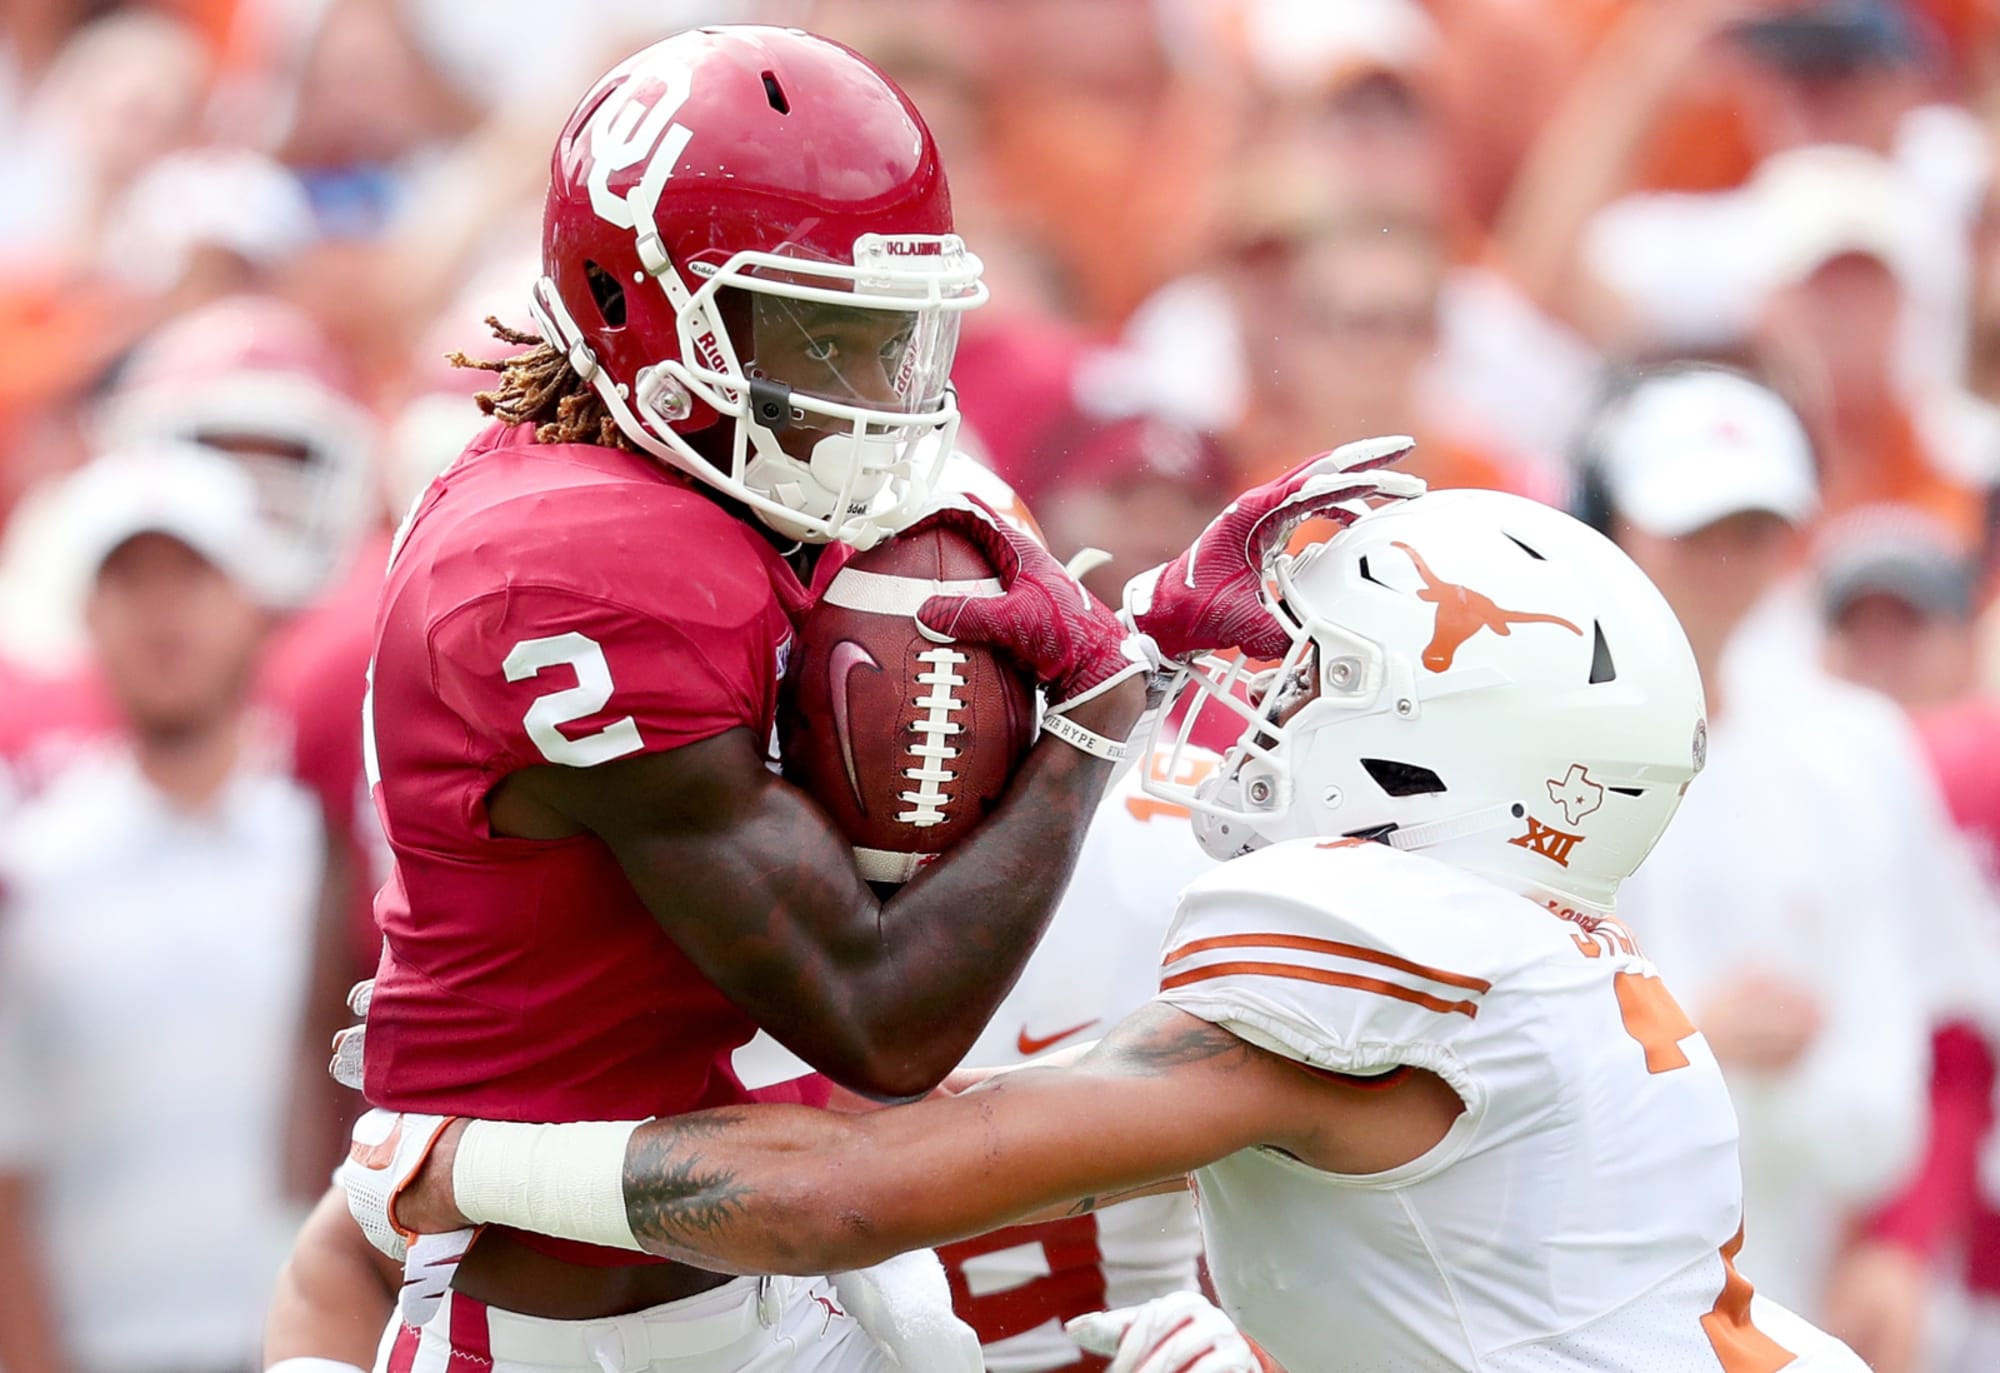 Oklahoma football Red River rivalry often showcases highranked teams